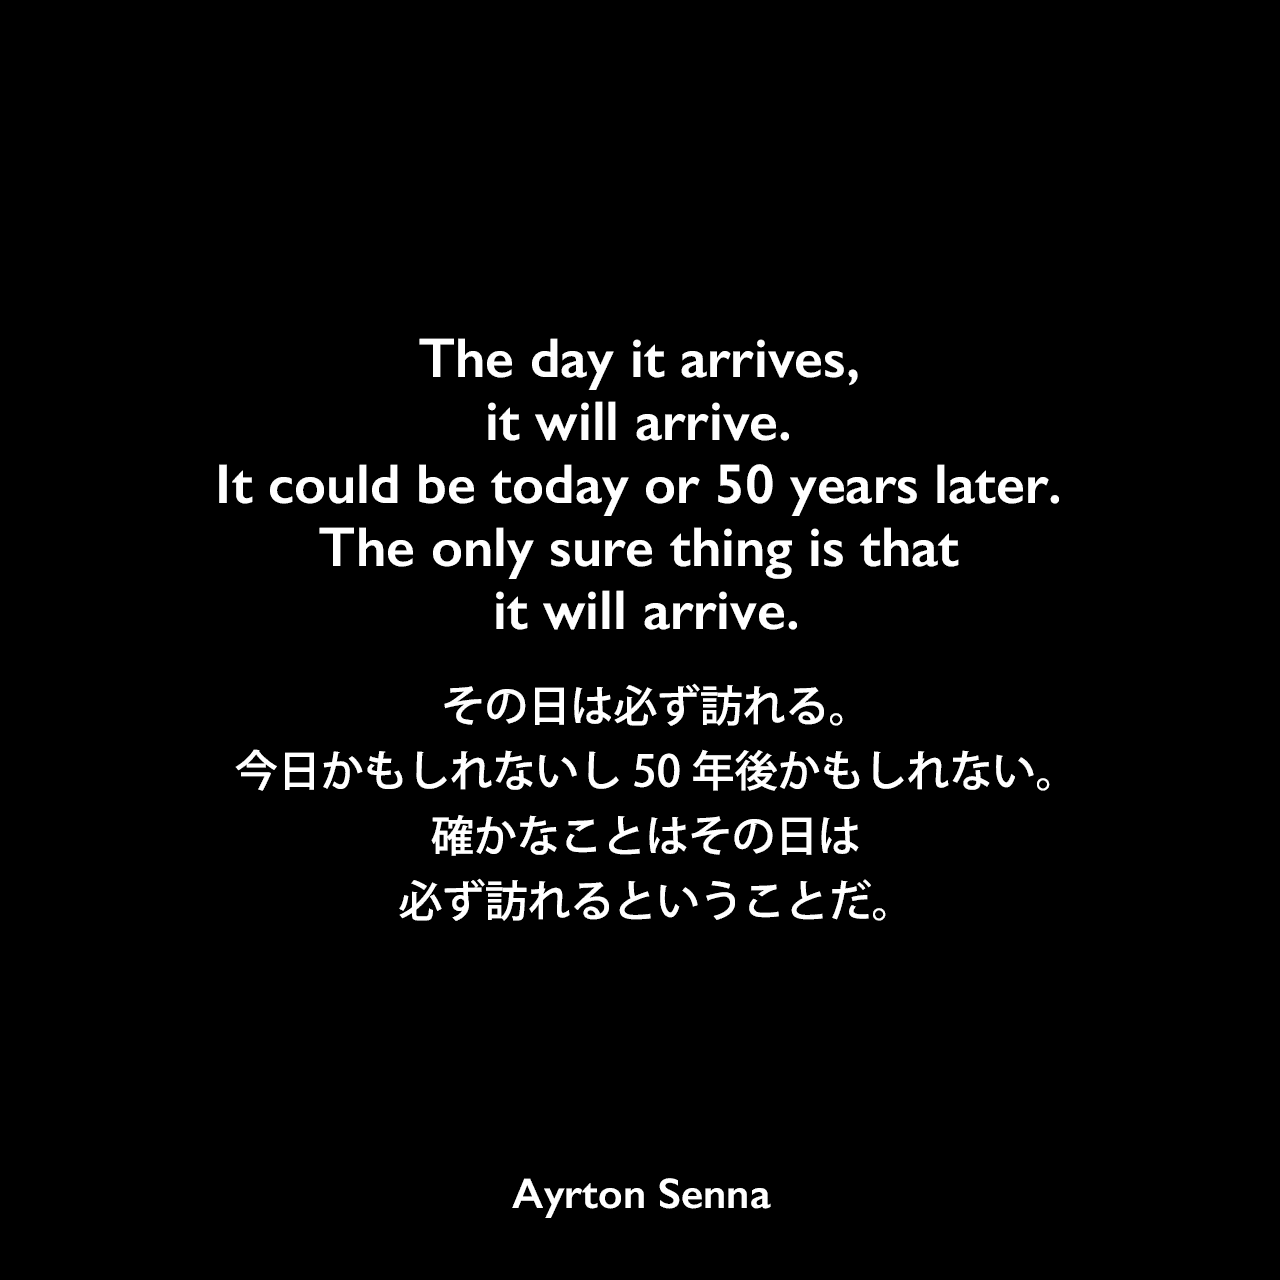 The day it arrives, it will arrive. It could be today or 50 years later. The only sure thing is that it will arrive.その日は必ず訪れる。今日かもしれないし50年後かもしれない。確かなことはその日は必ず訪れるということだ。Ayrton Senna